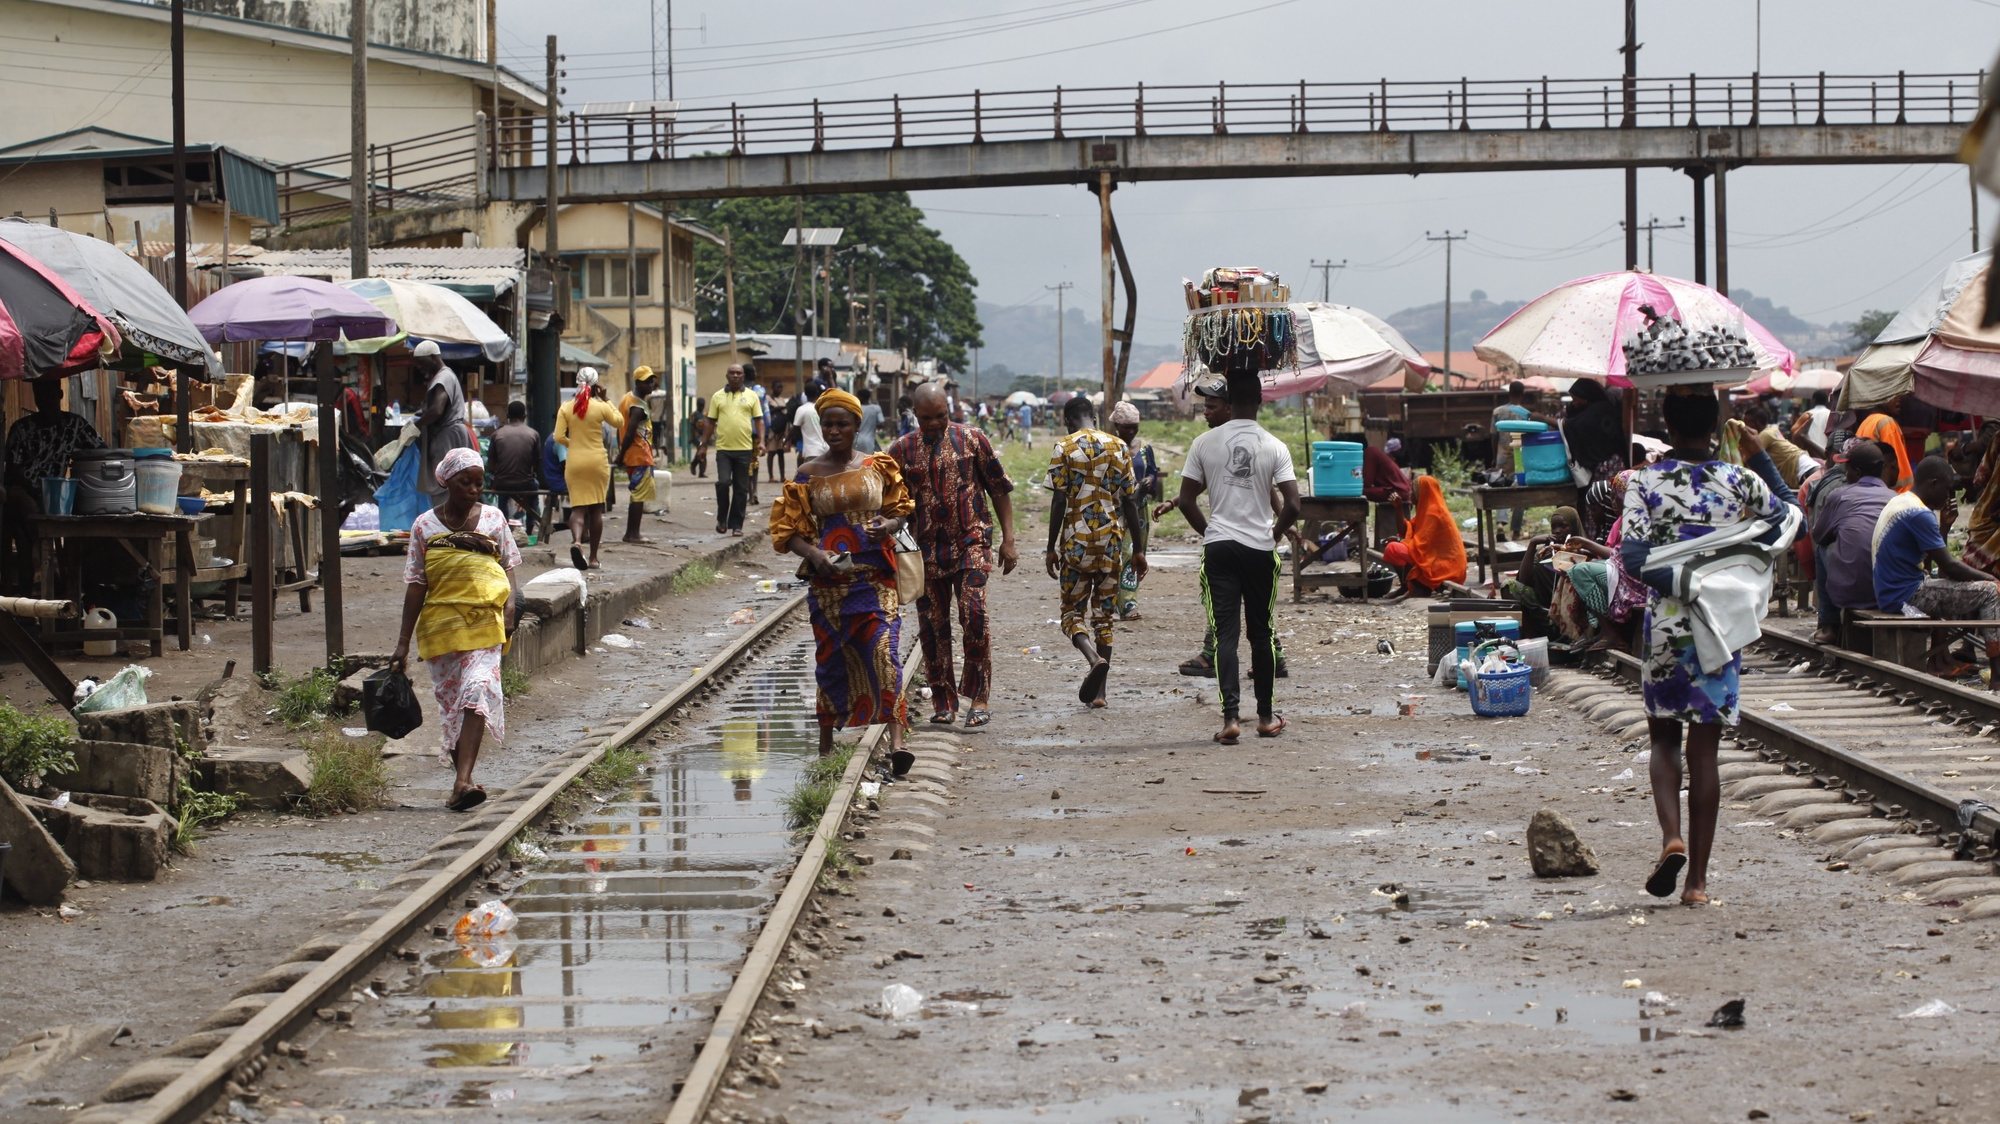 epa10307199 People walk through a slum near an abandoned train track in Abeokuta, about 70 kilometres outside Nigeria&#039;s commercial capital Lagos 15 November 2022. The global population is projected to reach 8 billion on 15 November 2022 . More than half of the projected increase in the global population up to 2050 will be concentrated in eight countries: the Democratic Republic of the Congo, Egypt, Ethiopia, India, Nigeria, Pakistan, the Philippines and the United Republic of Tanzania. Countries of sub-Saharan Africa are expected to contribute more than half of the increase anticipated through 2050, according to the United Nations&#039; report.  EPA/AKINTUNDE AKINLEYE